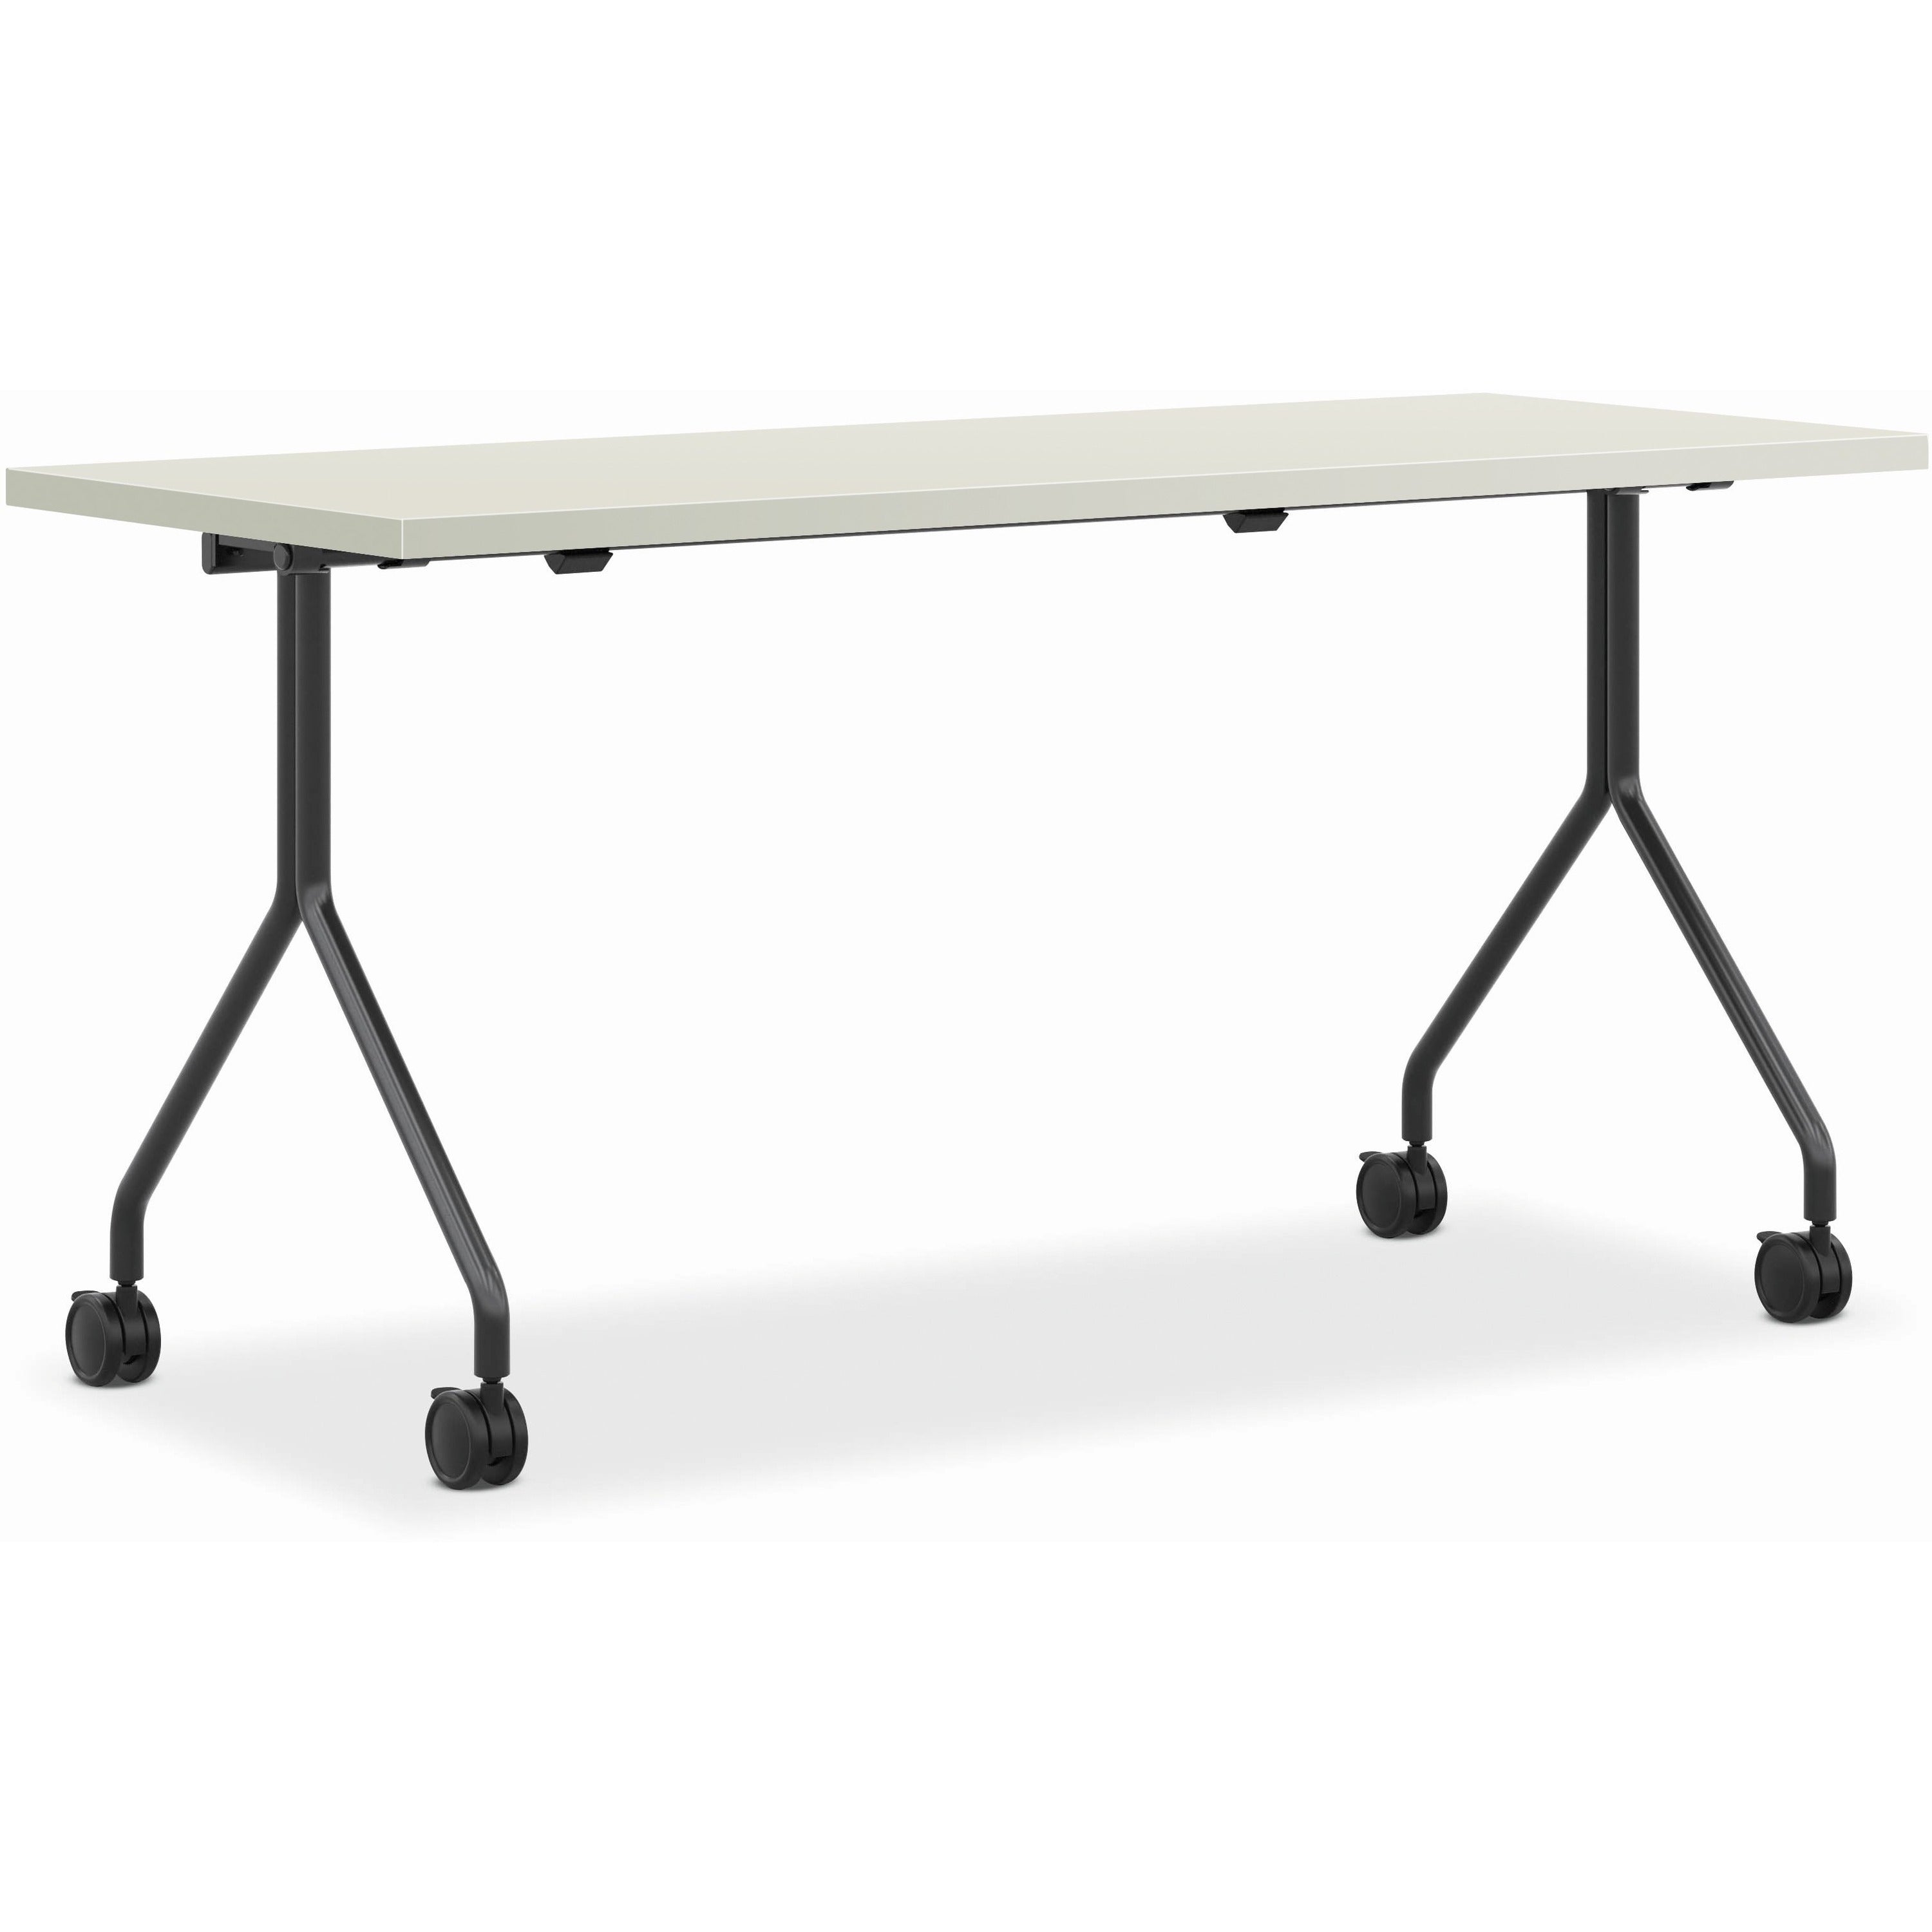 hon-between-hmpt3072ns-nesting-table-for-table-toprectangle-top-4-seating-capacity-x-72-width-x-30-depth-silver-mesh_honpt3072nsb9lt - 1